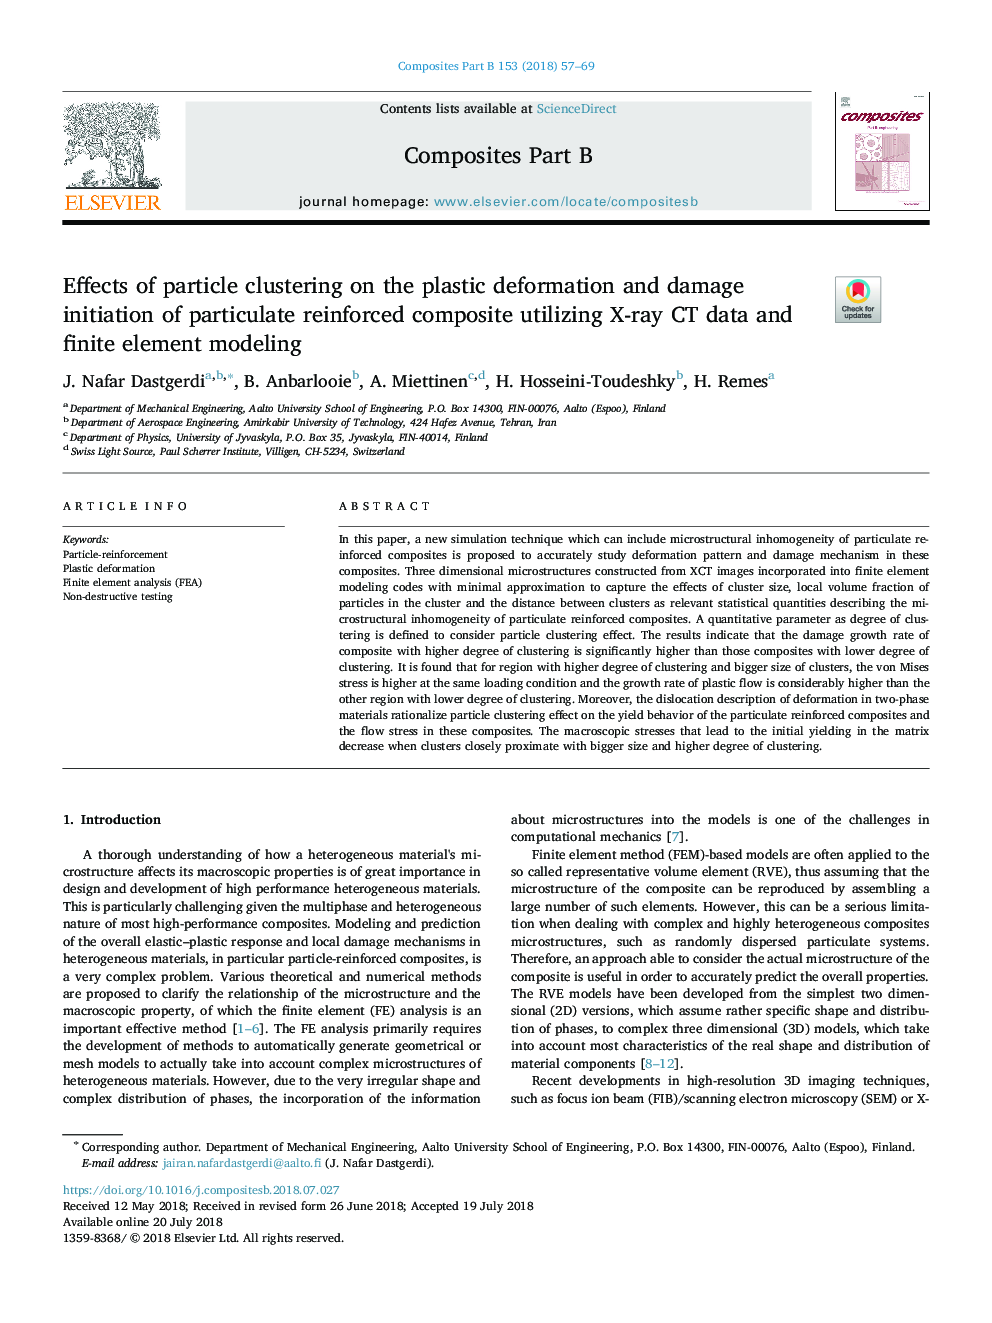 Effects of particle clustering on the plastic deformation and damage initiation of particulate reinforced composite utilizing X-ray CT data and finite element modeling